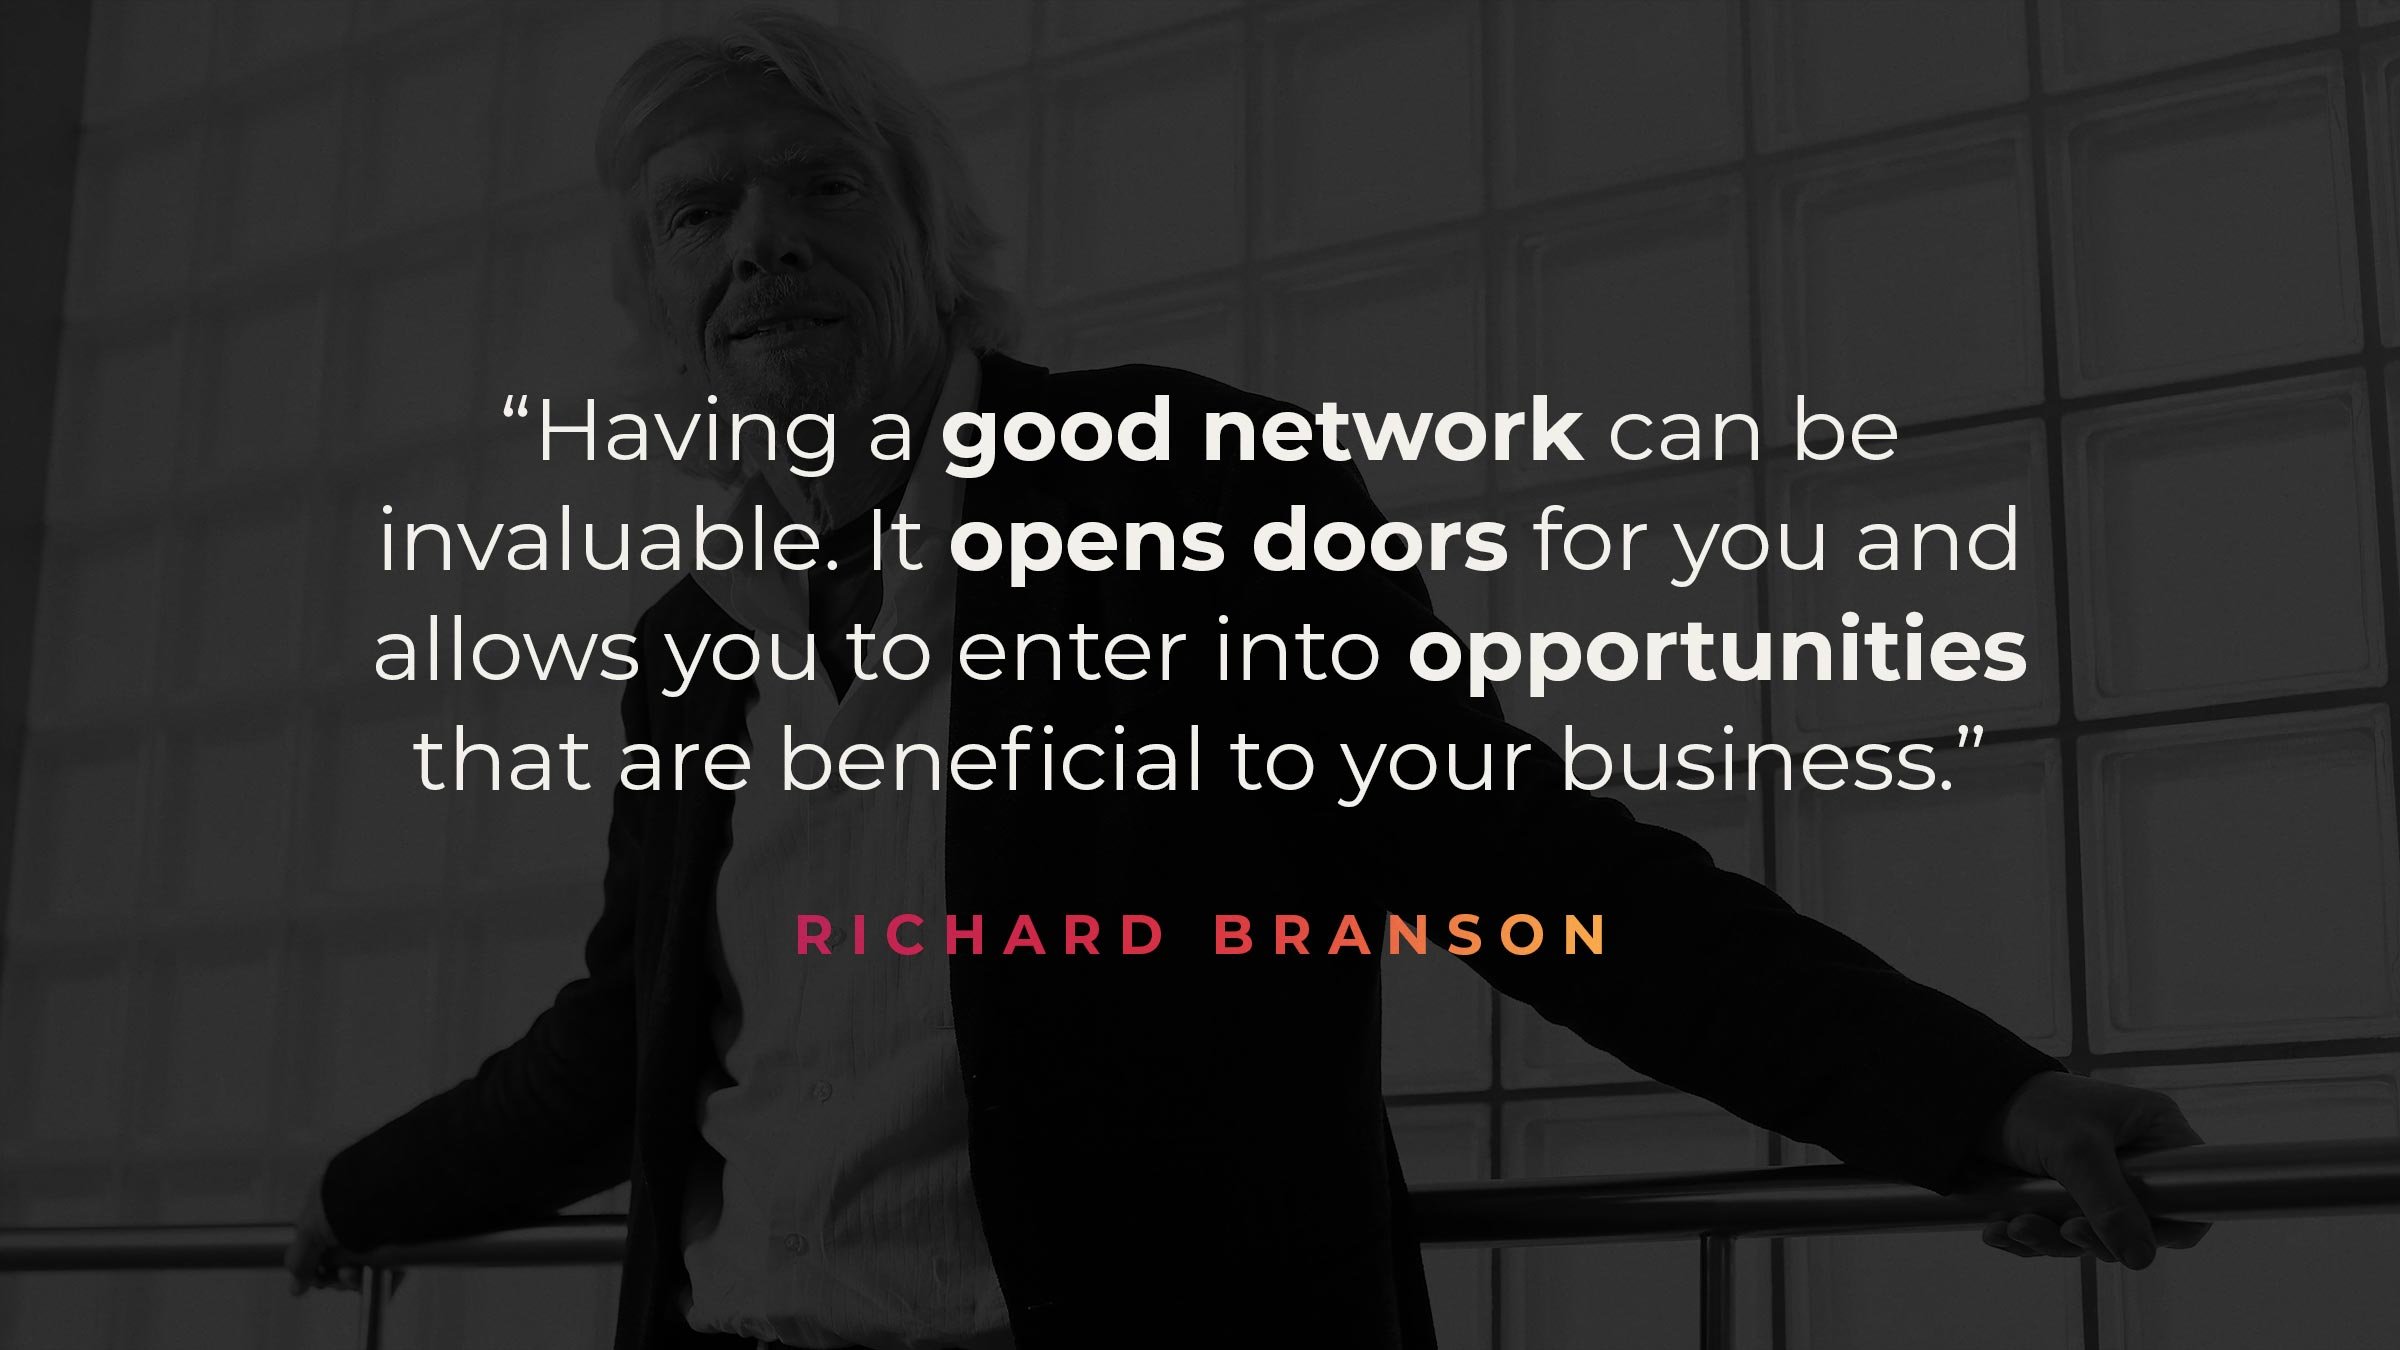 “Having a good network can be invaluable. It opens doors for you and allows you to enter into opportunities that are beneficial to your business." - Richard Branson